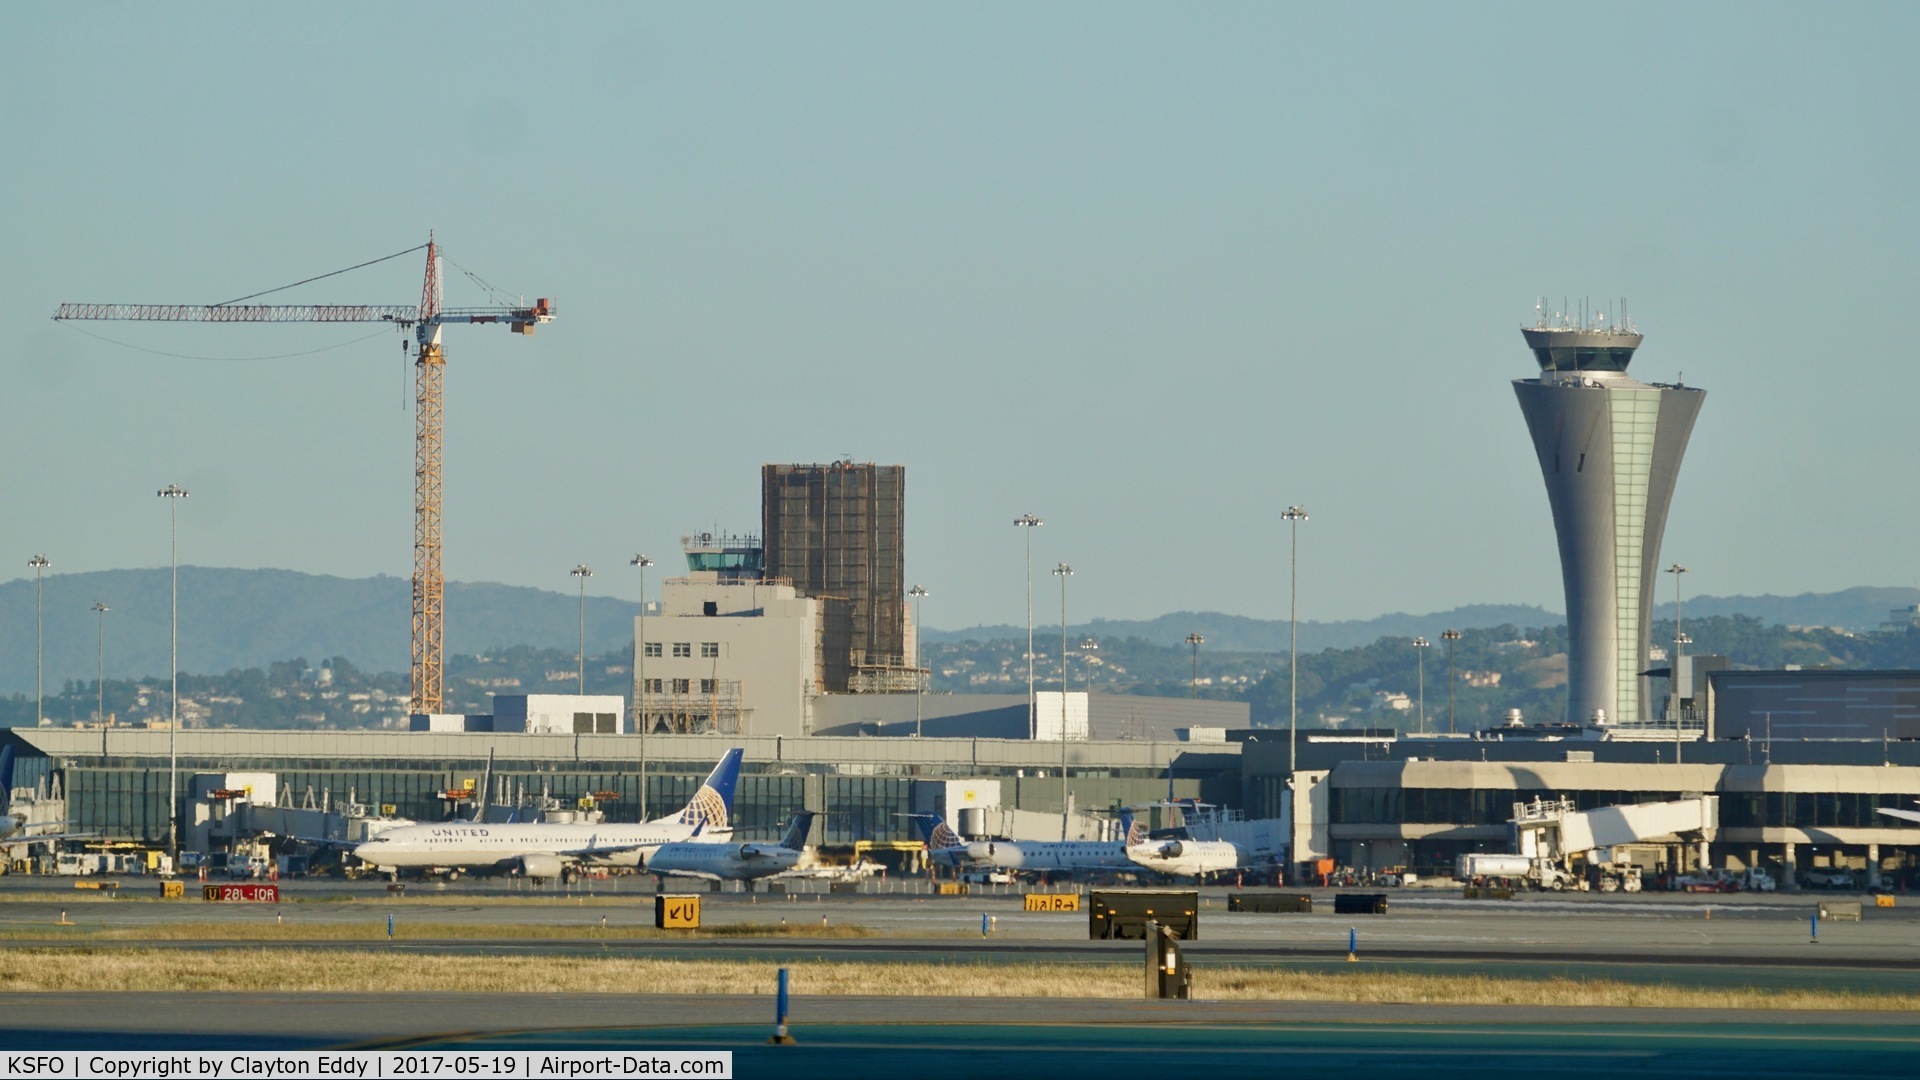 San Francisco International Airport (SFO) - Old towers being dismantled at San Francisco Airport. Tower on the left still has the old beacon.